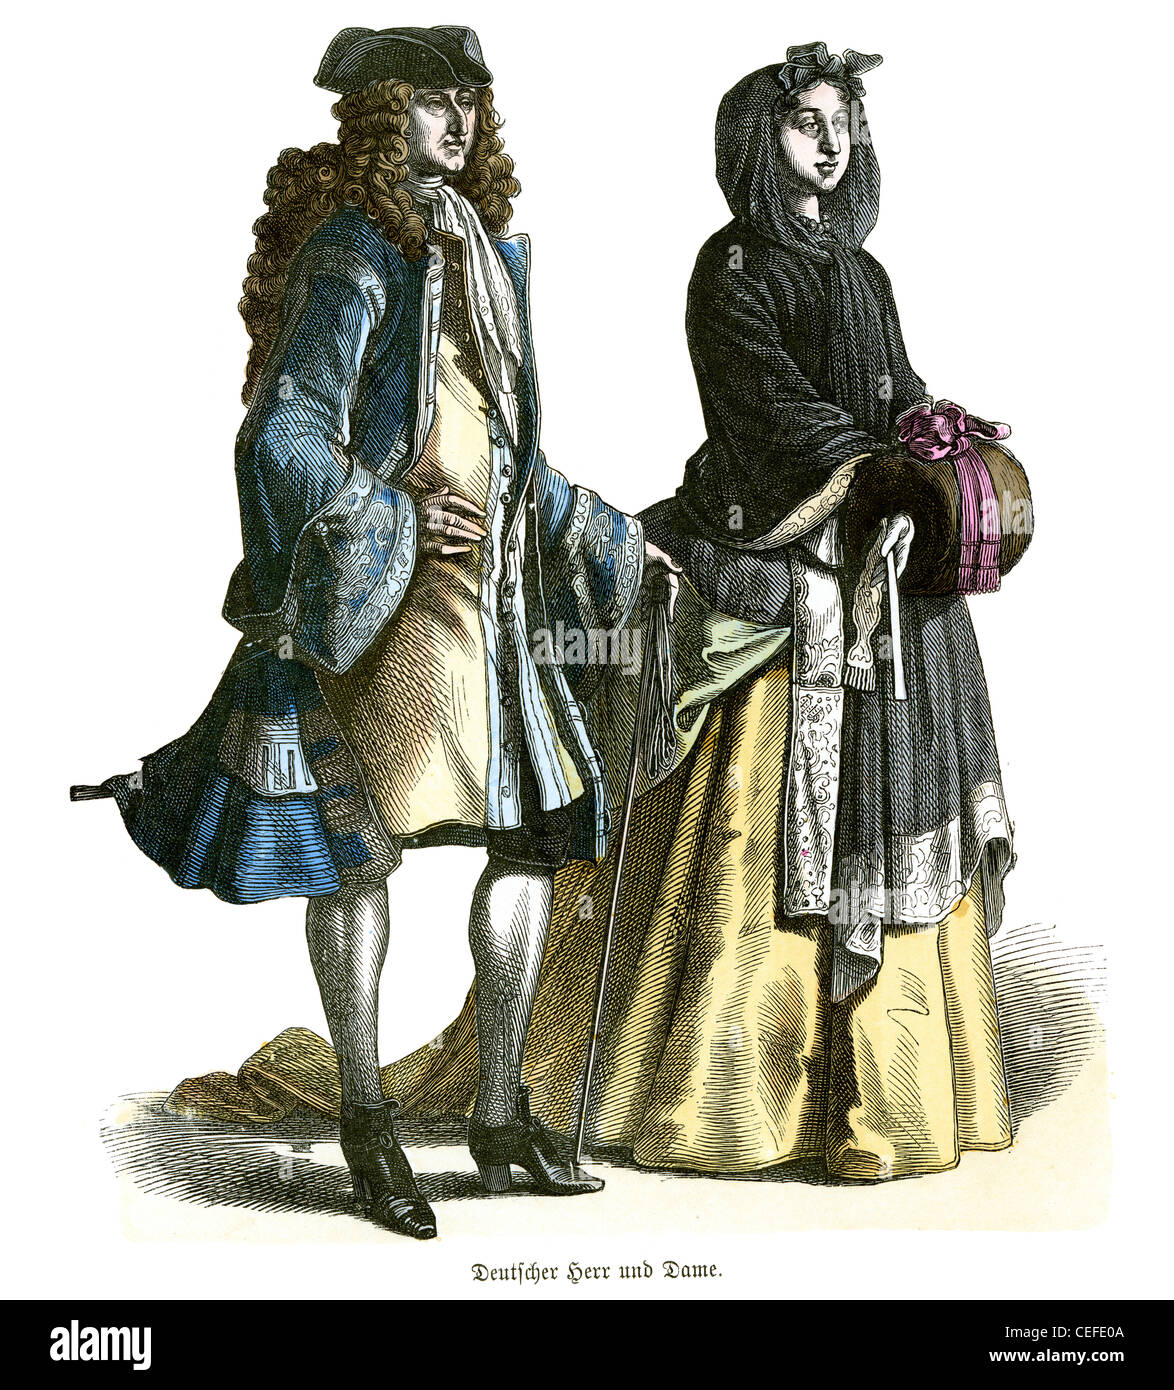 A German lord and lady from the first third of the 18th century Stock Photo